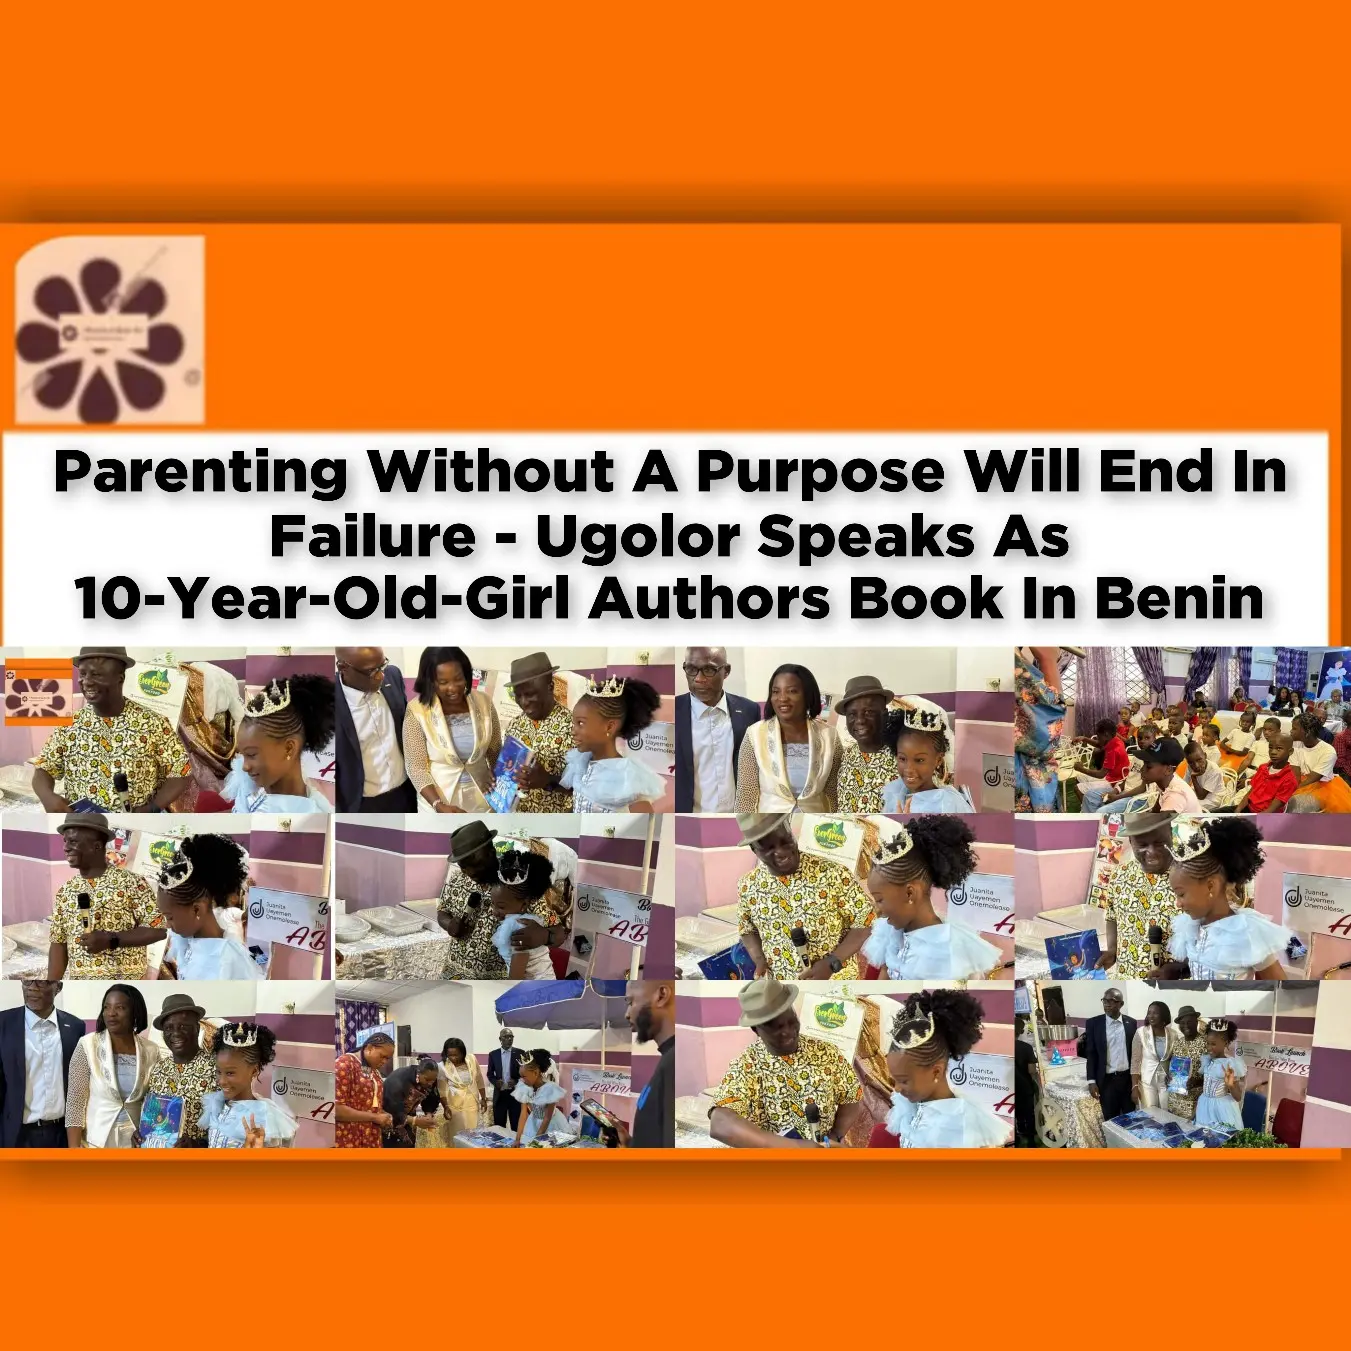 Parenting Without A Purpose Will End In Failure - Ugolor Speaks As 10-Year-Old-Girl Authors Book In Benin ~ OsazuwaAkonedo #FaniKayode